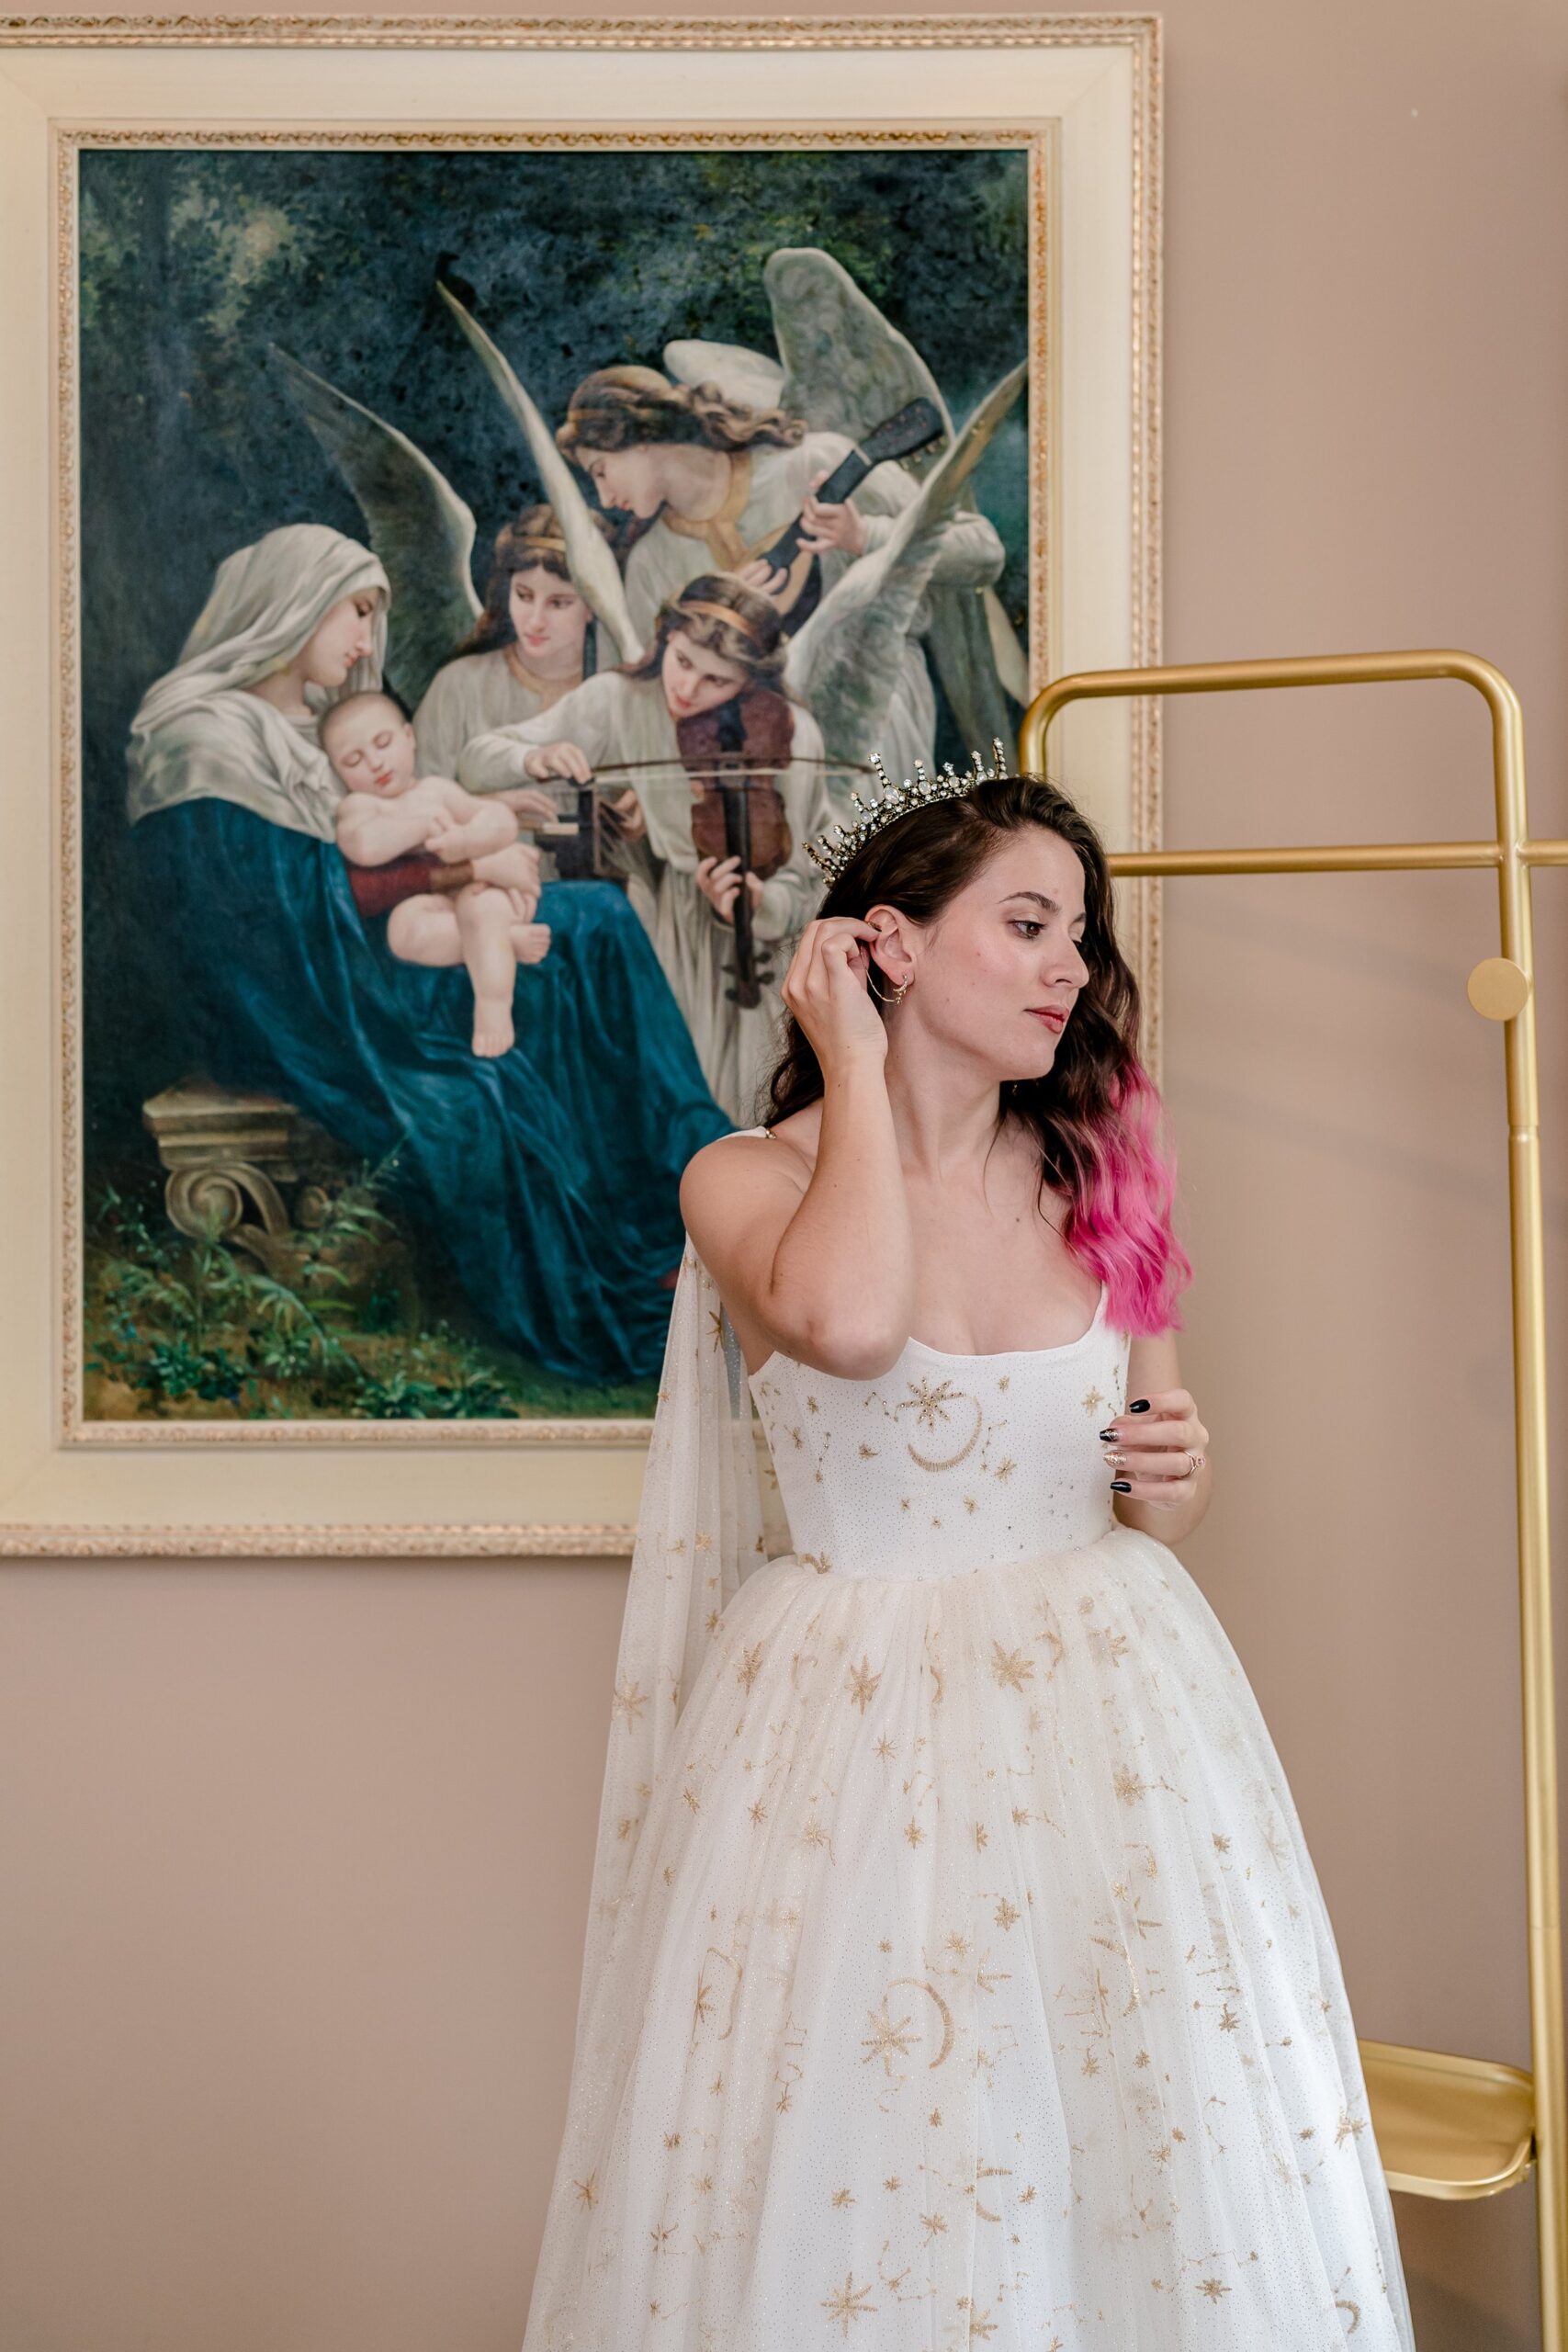 A bride wearing a celestial dress adjusts her hair in front of a Renaissance painting before her wedding at Stone Manor Boutique Inn in Loudoun County Virginia